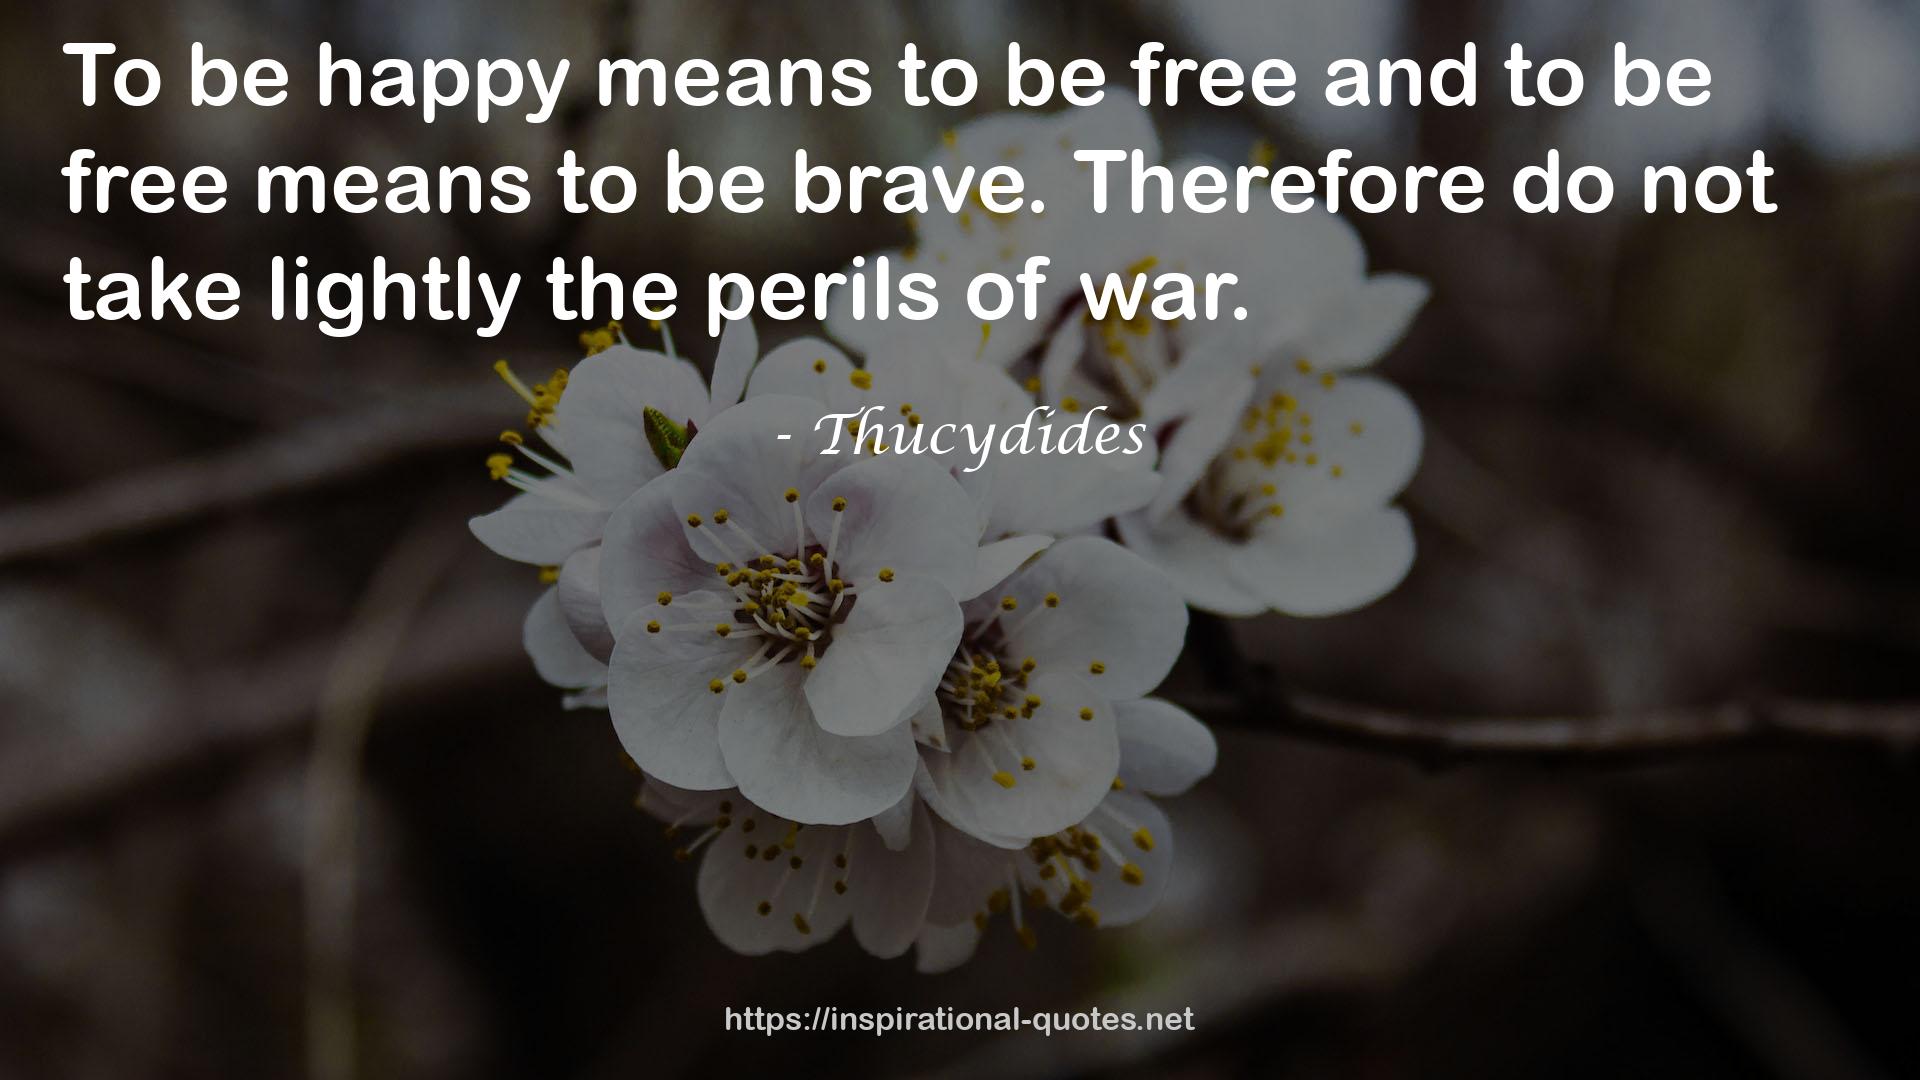 Thucydides QUOTES